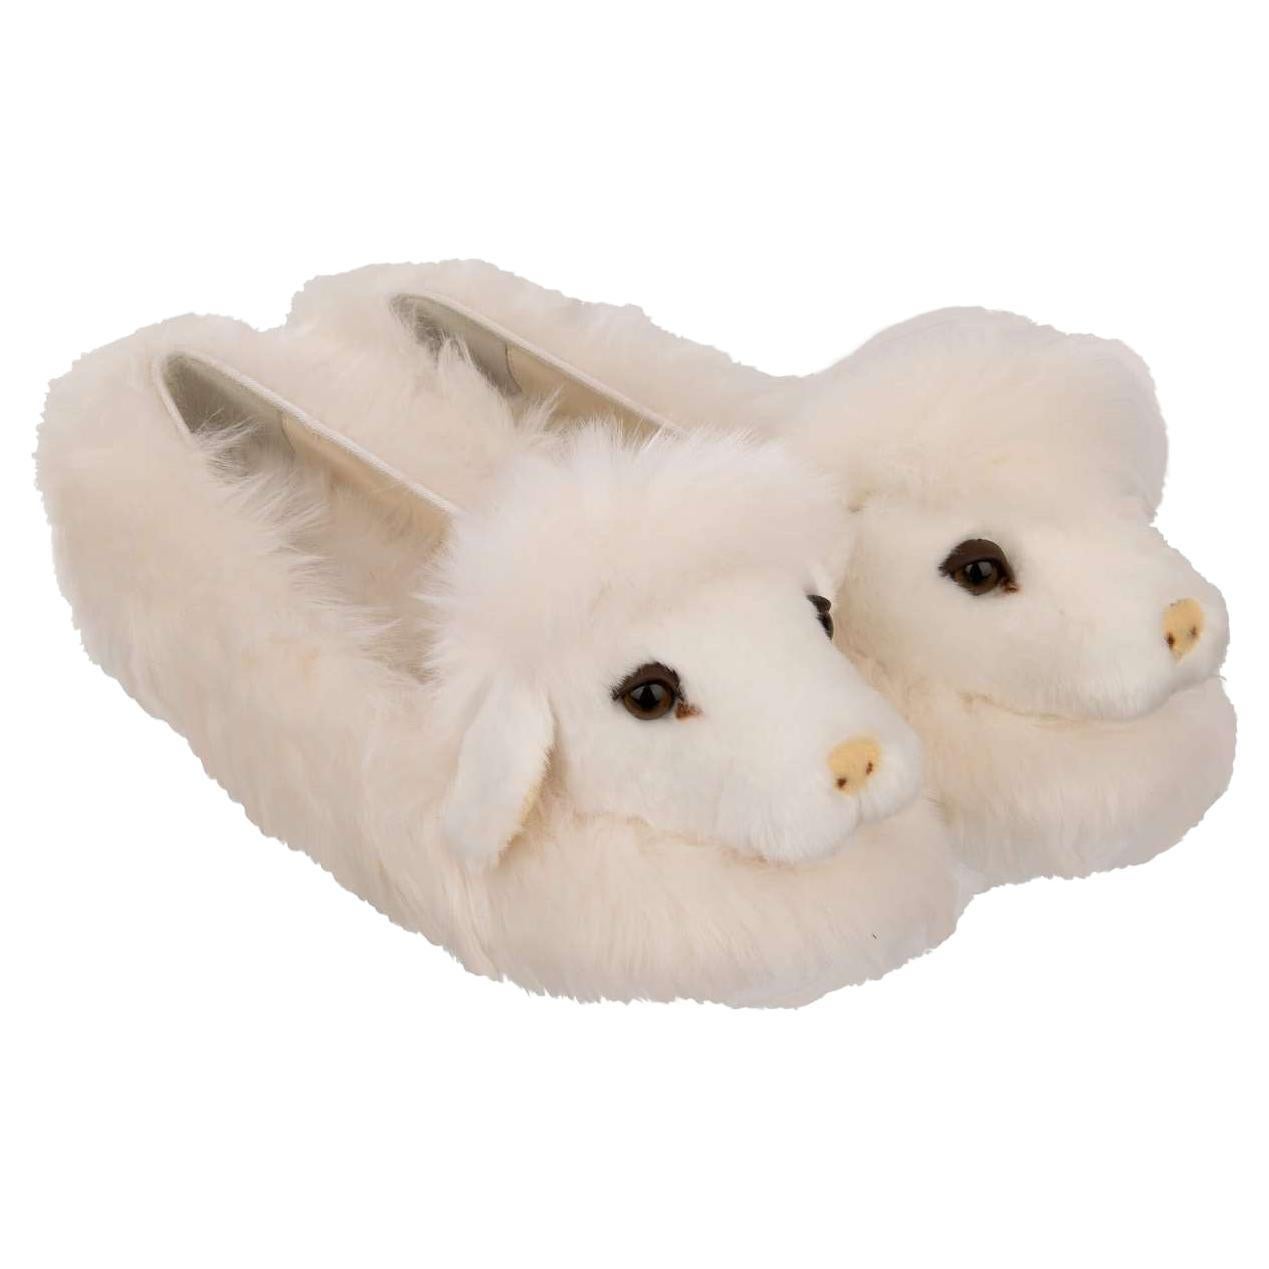 Dolce & Gabbana - Sheep Toy Eco Faux Fur Ballet Flats VALLY White 39.9 For Sale